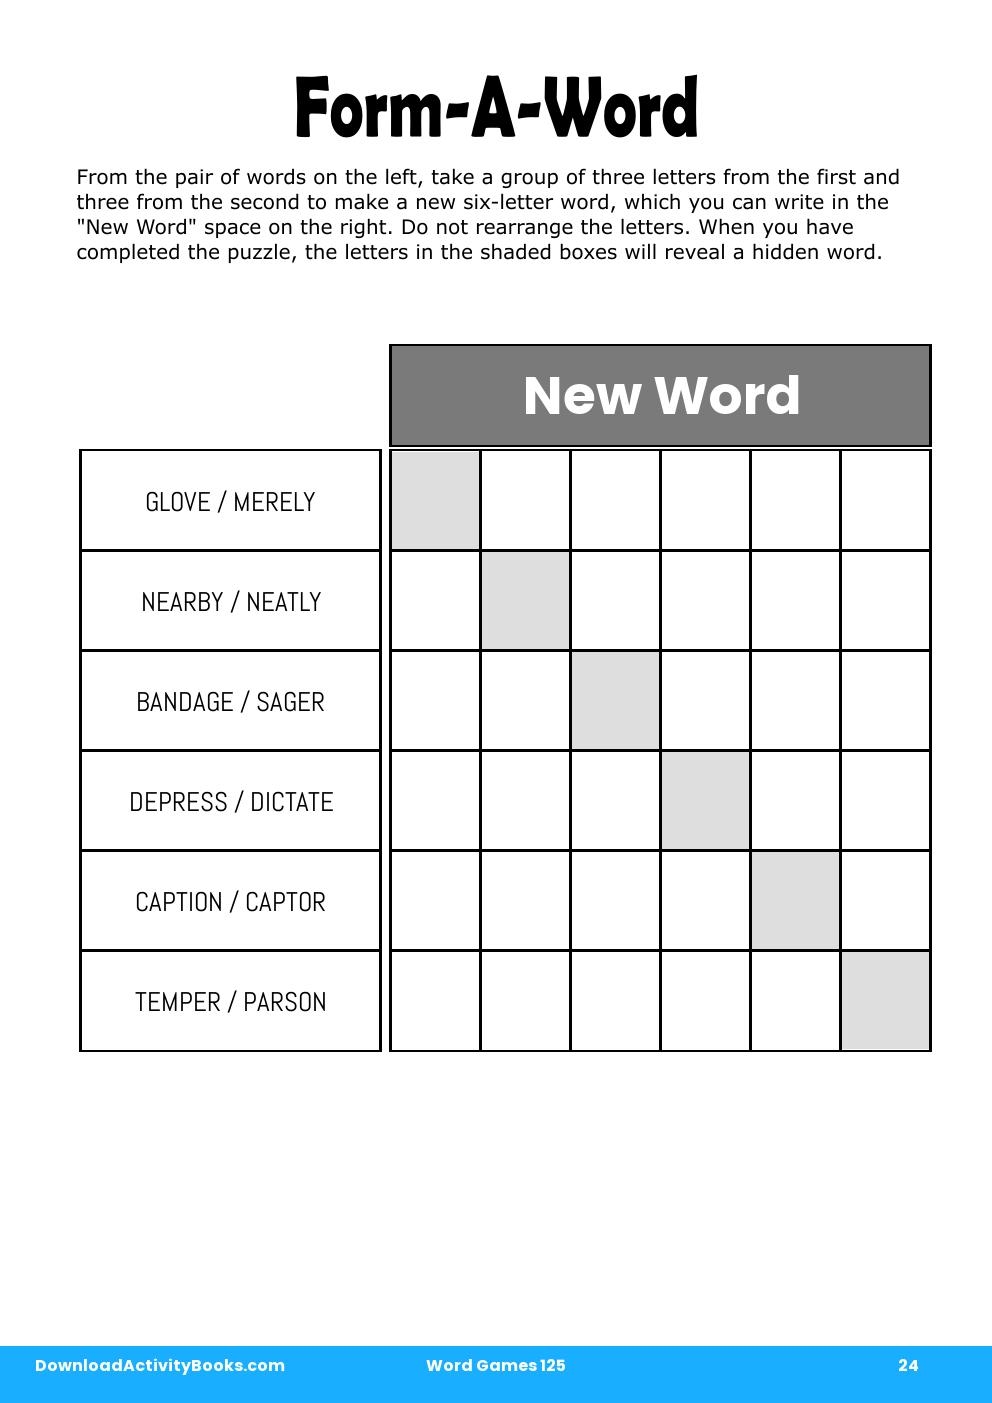 Form-A-Word in Word Games 125